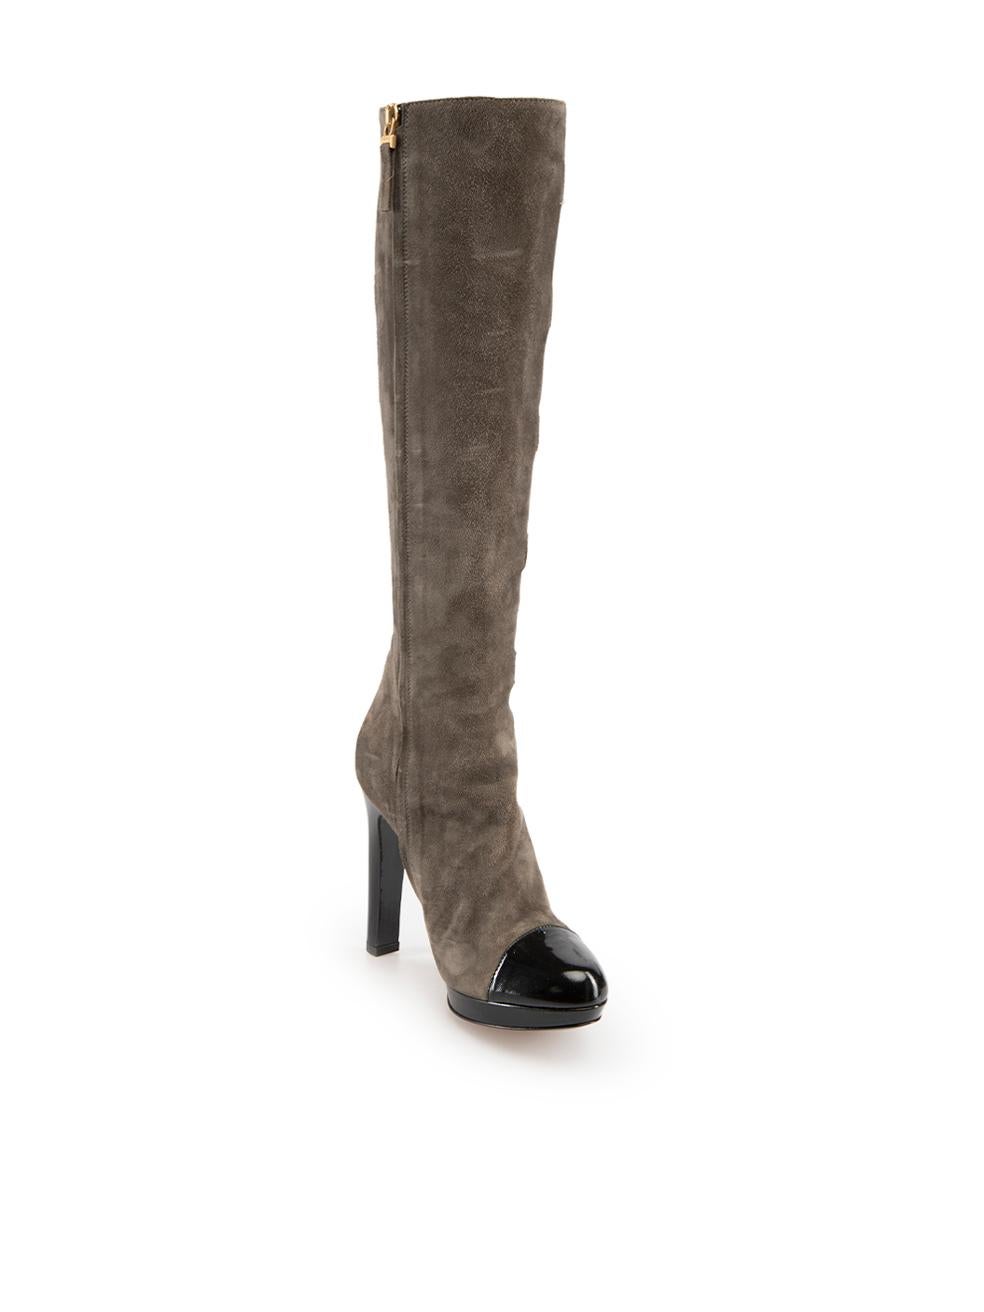 CONDITION is Never worn. No visible wear to boots is evident on this new Fendi designer resale item.
 
 Details
 Grey
 Suede
 Boots
 Knee high
 Almond toe
 Side zip fastening
 High heeled
 Black patent leather trim
 
 
 Made in Italy
 
 Composition
